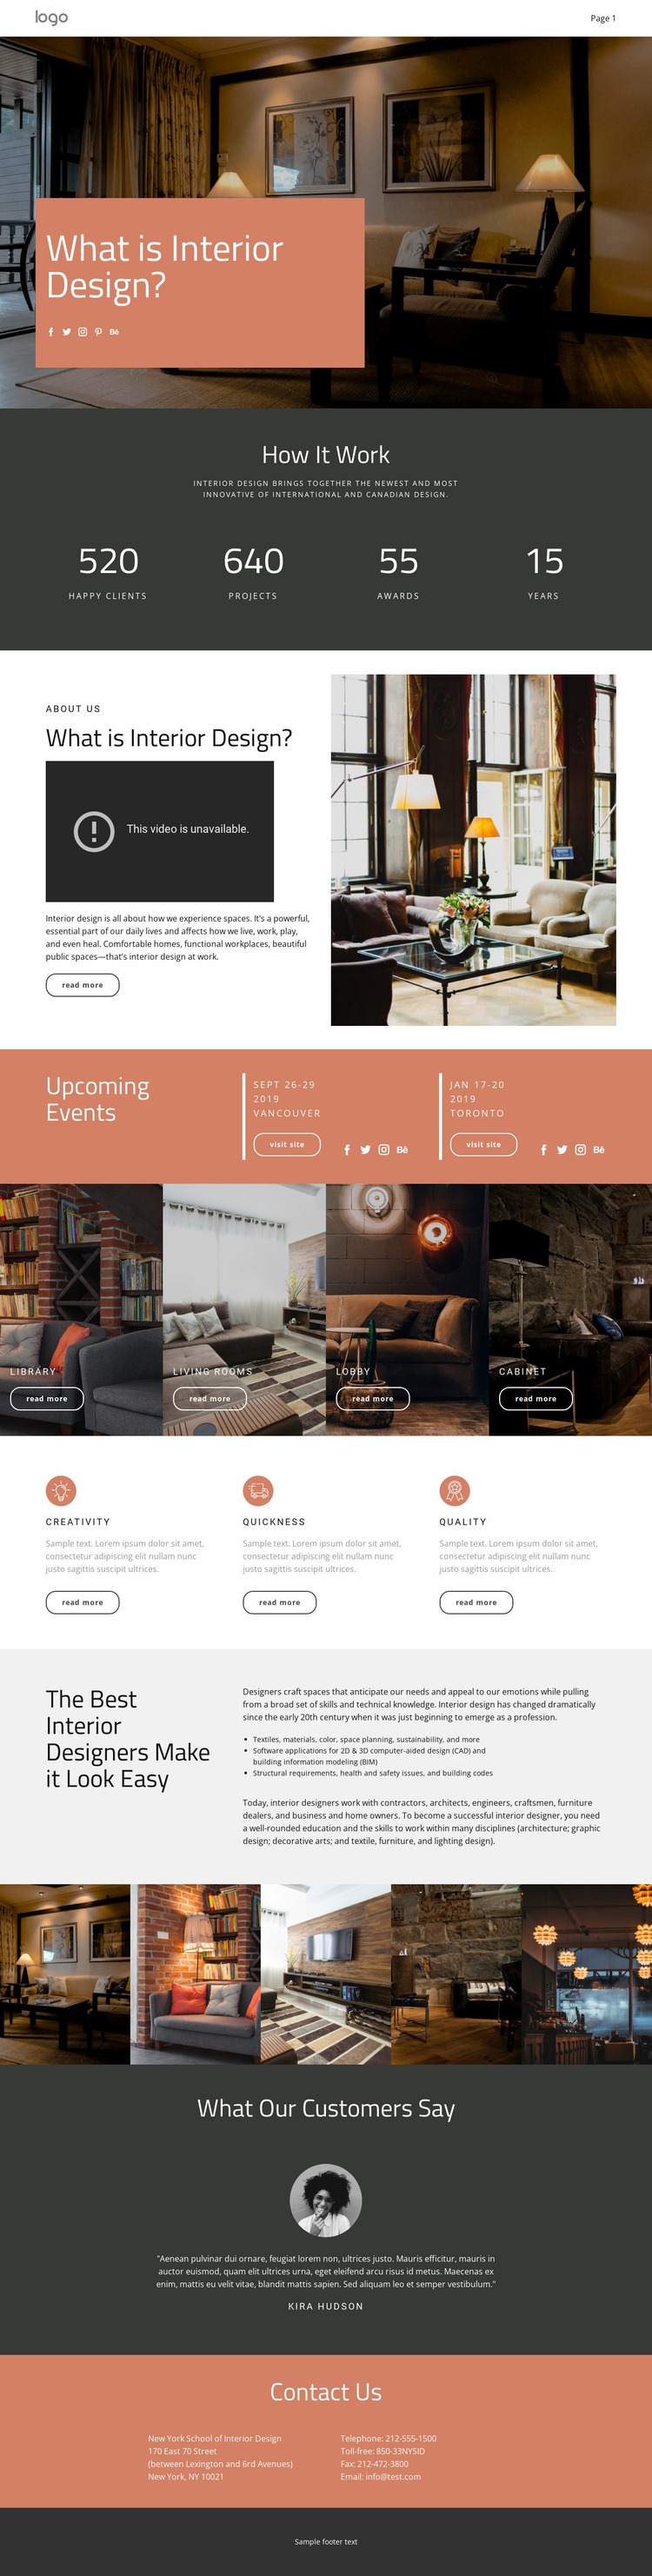 Design of houses and apartments Website Mockup